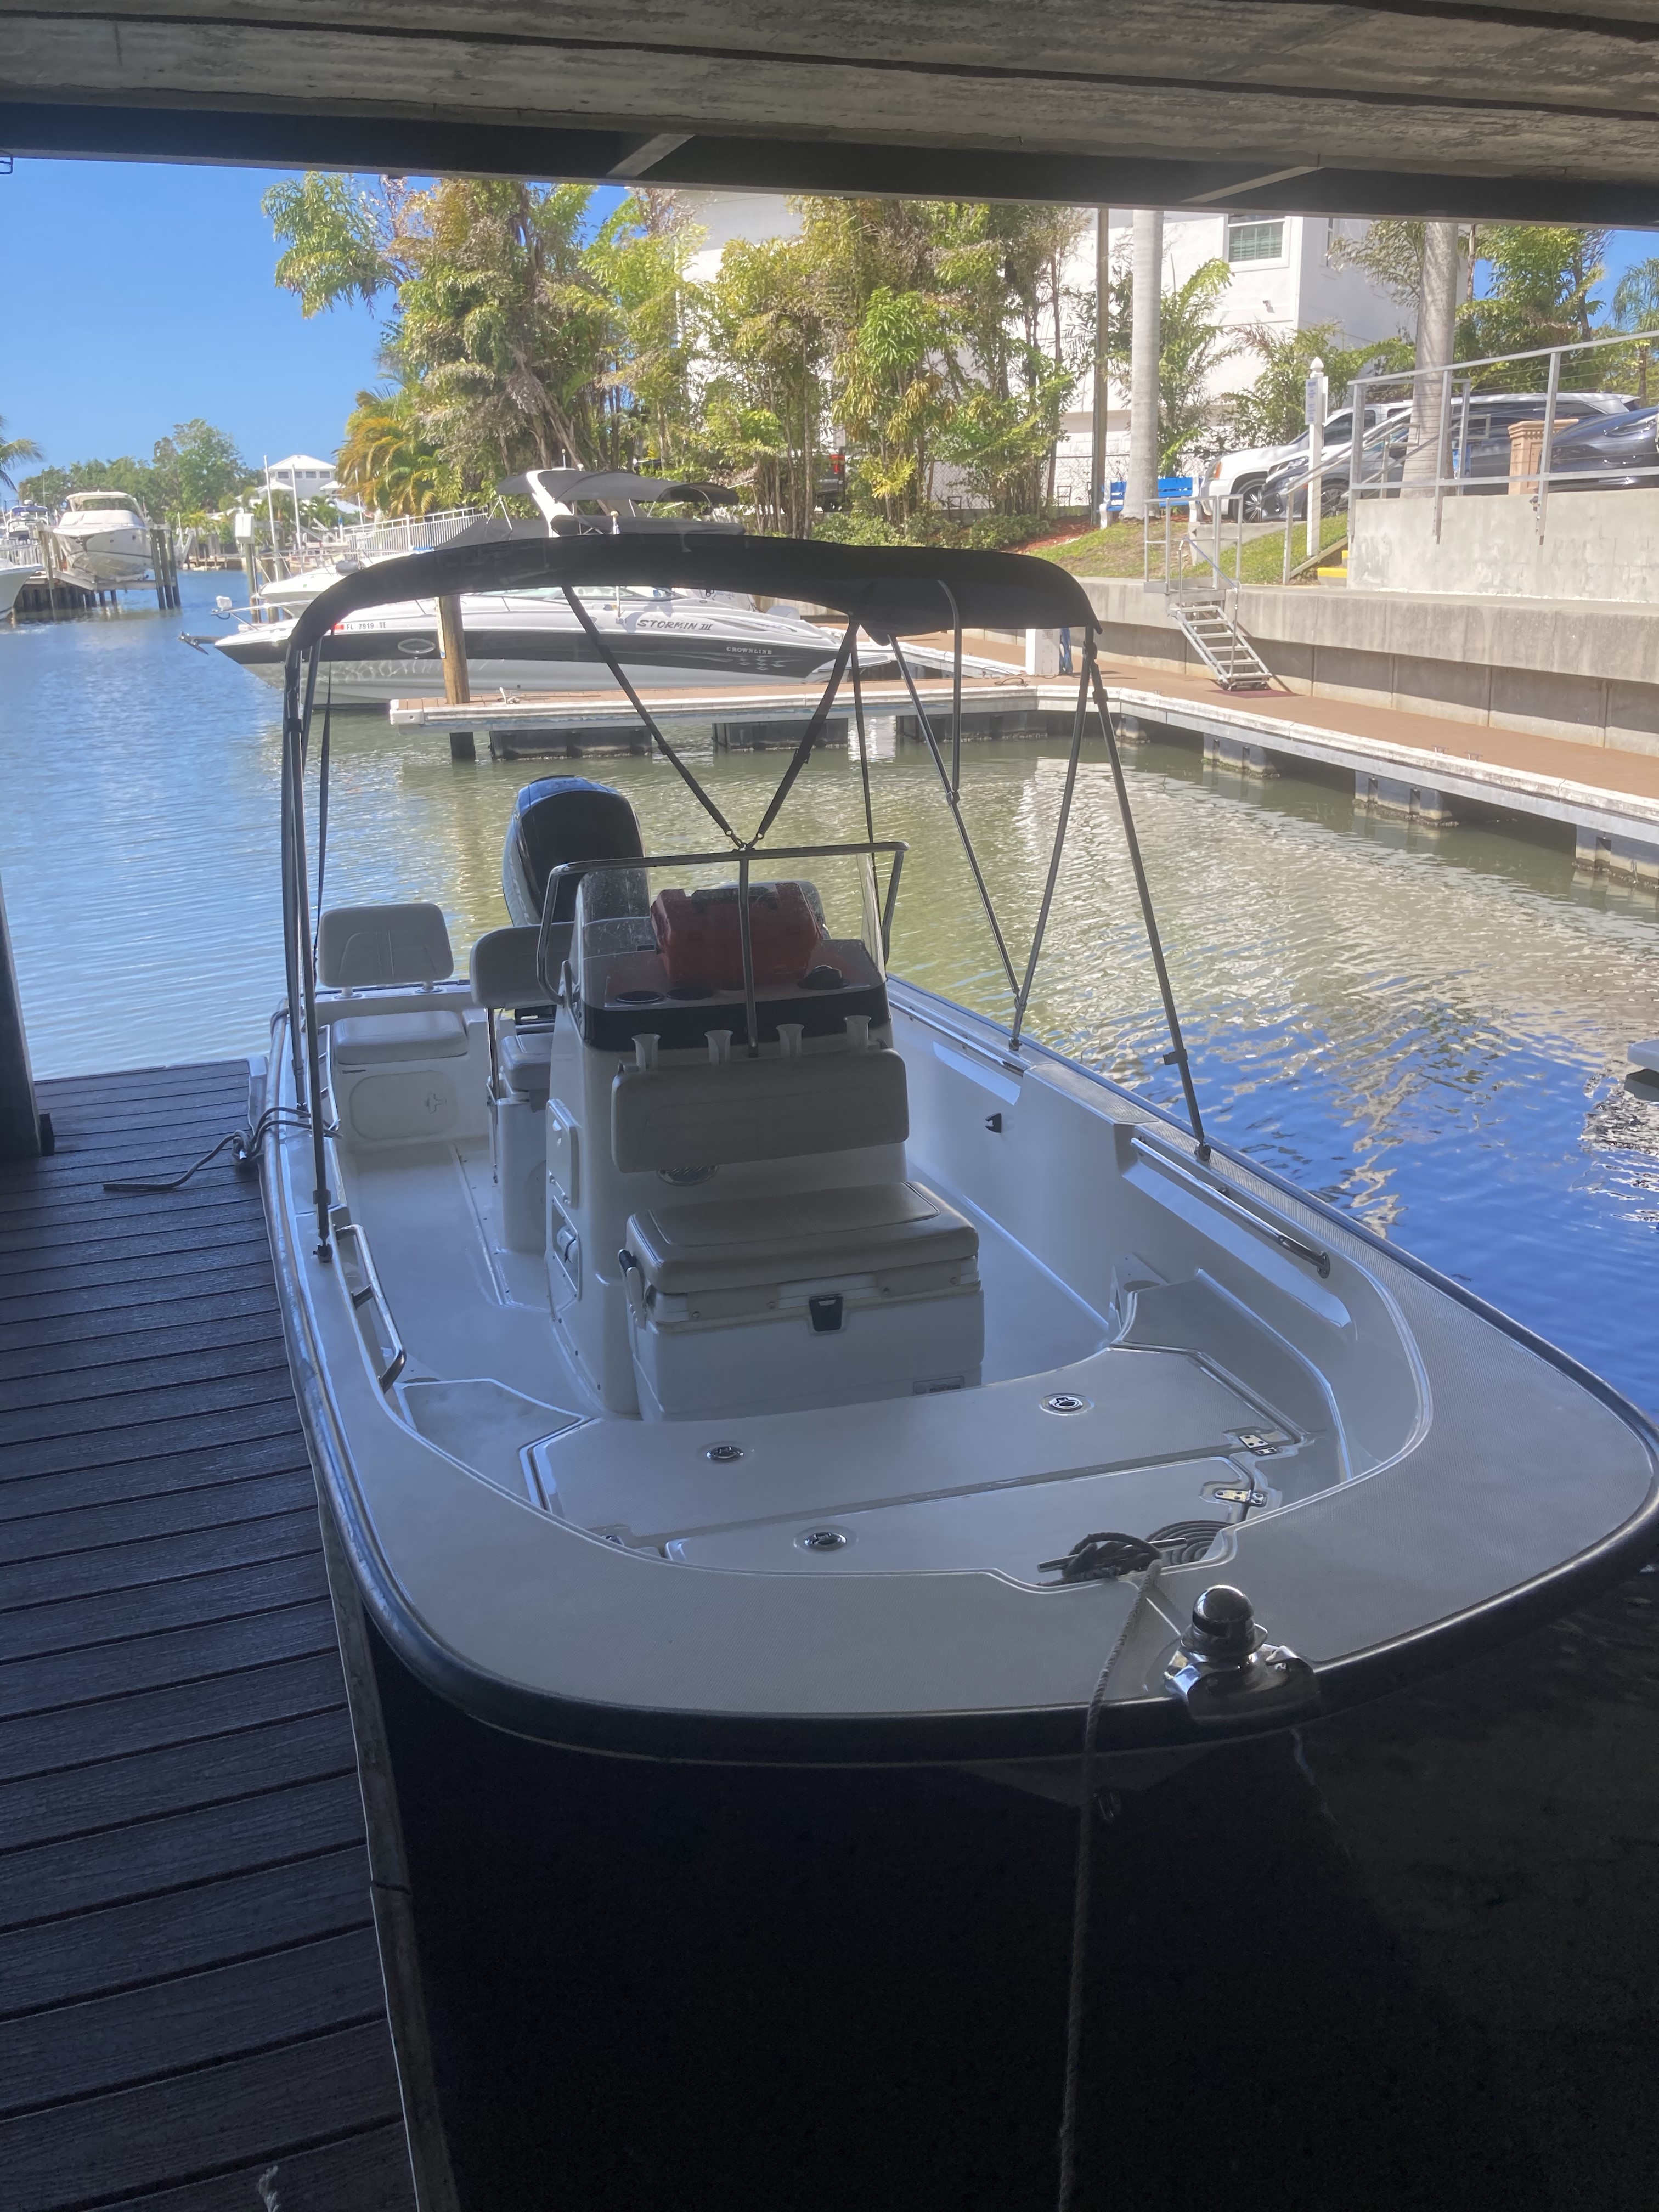 KNOT AGAIN (17' Center Console-Boston Whaler- 90 HP-Fishing)